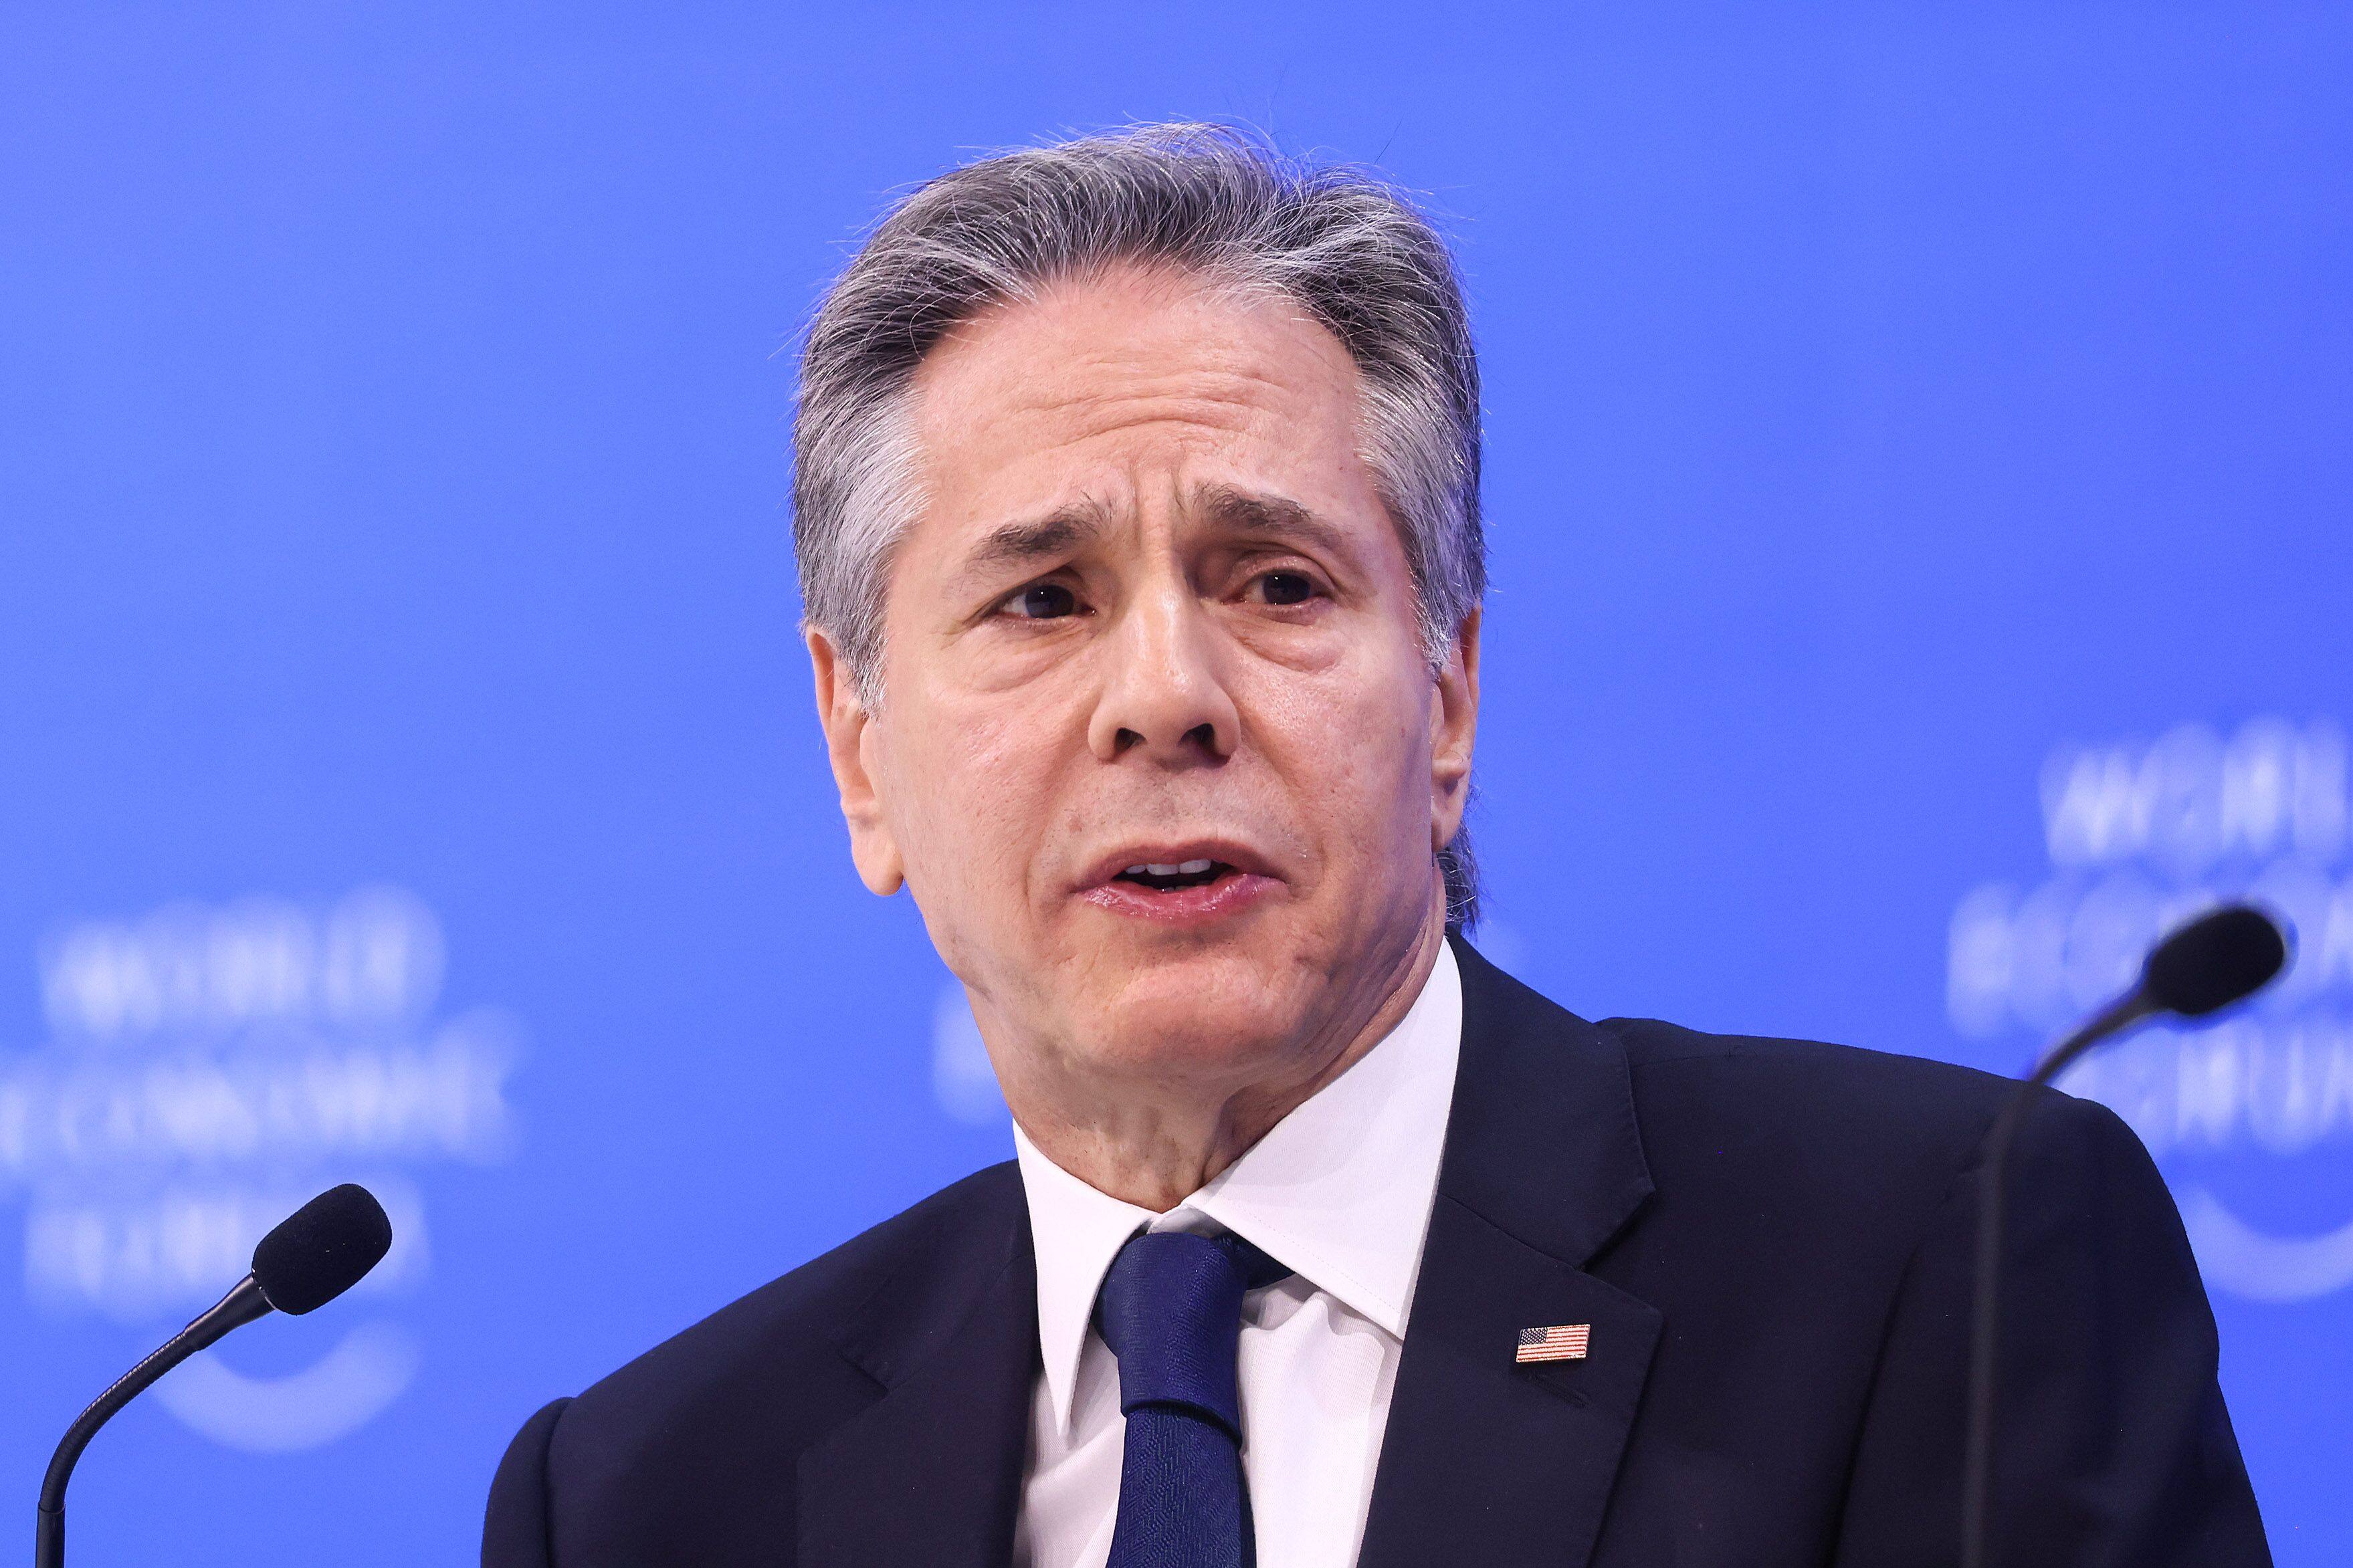 Antony Blinken, US secretary of state, speaks during a conversation session on day two of the World Economic Forum in Davos, Switzerland, on Wednesday. Photo: Bloomberg